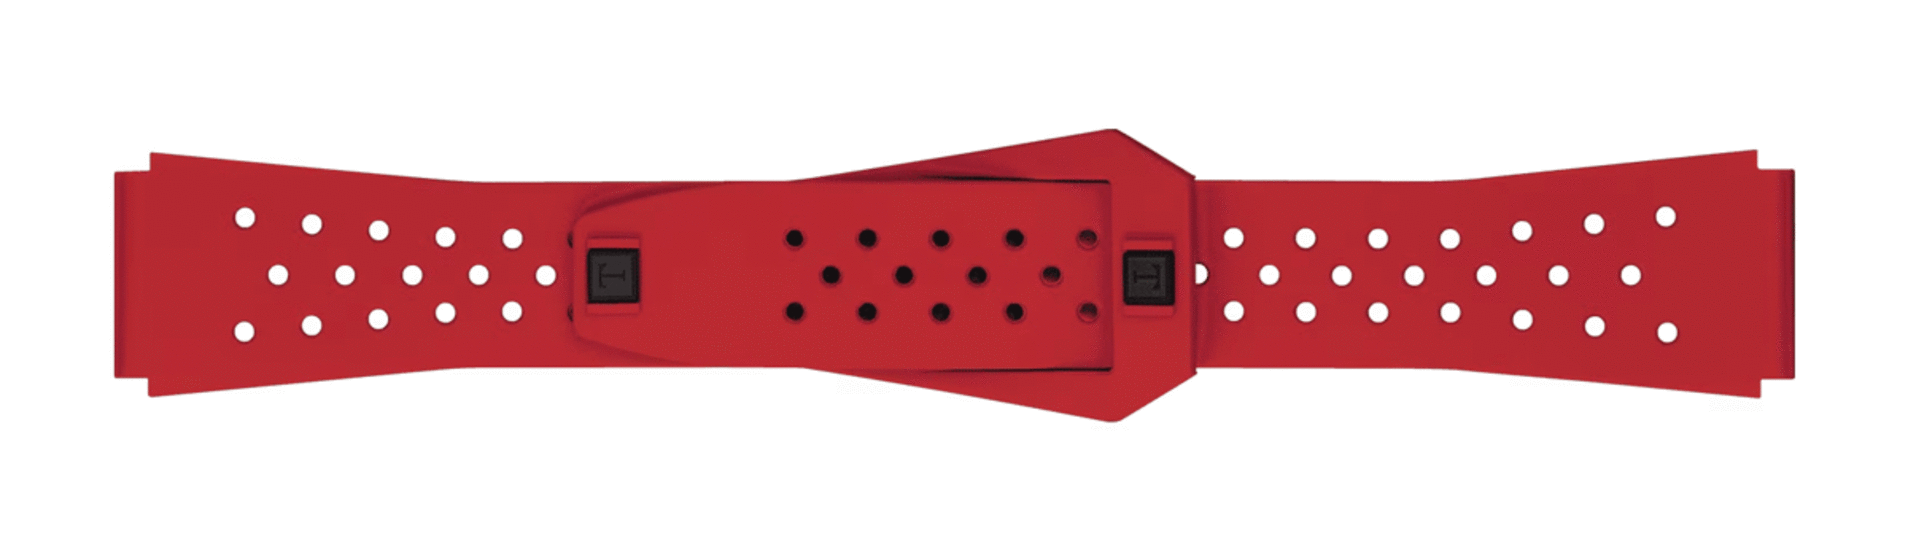 TISSOT OFFICIAL RED SIDERAL RUBBER STRAP T852.048.860